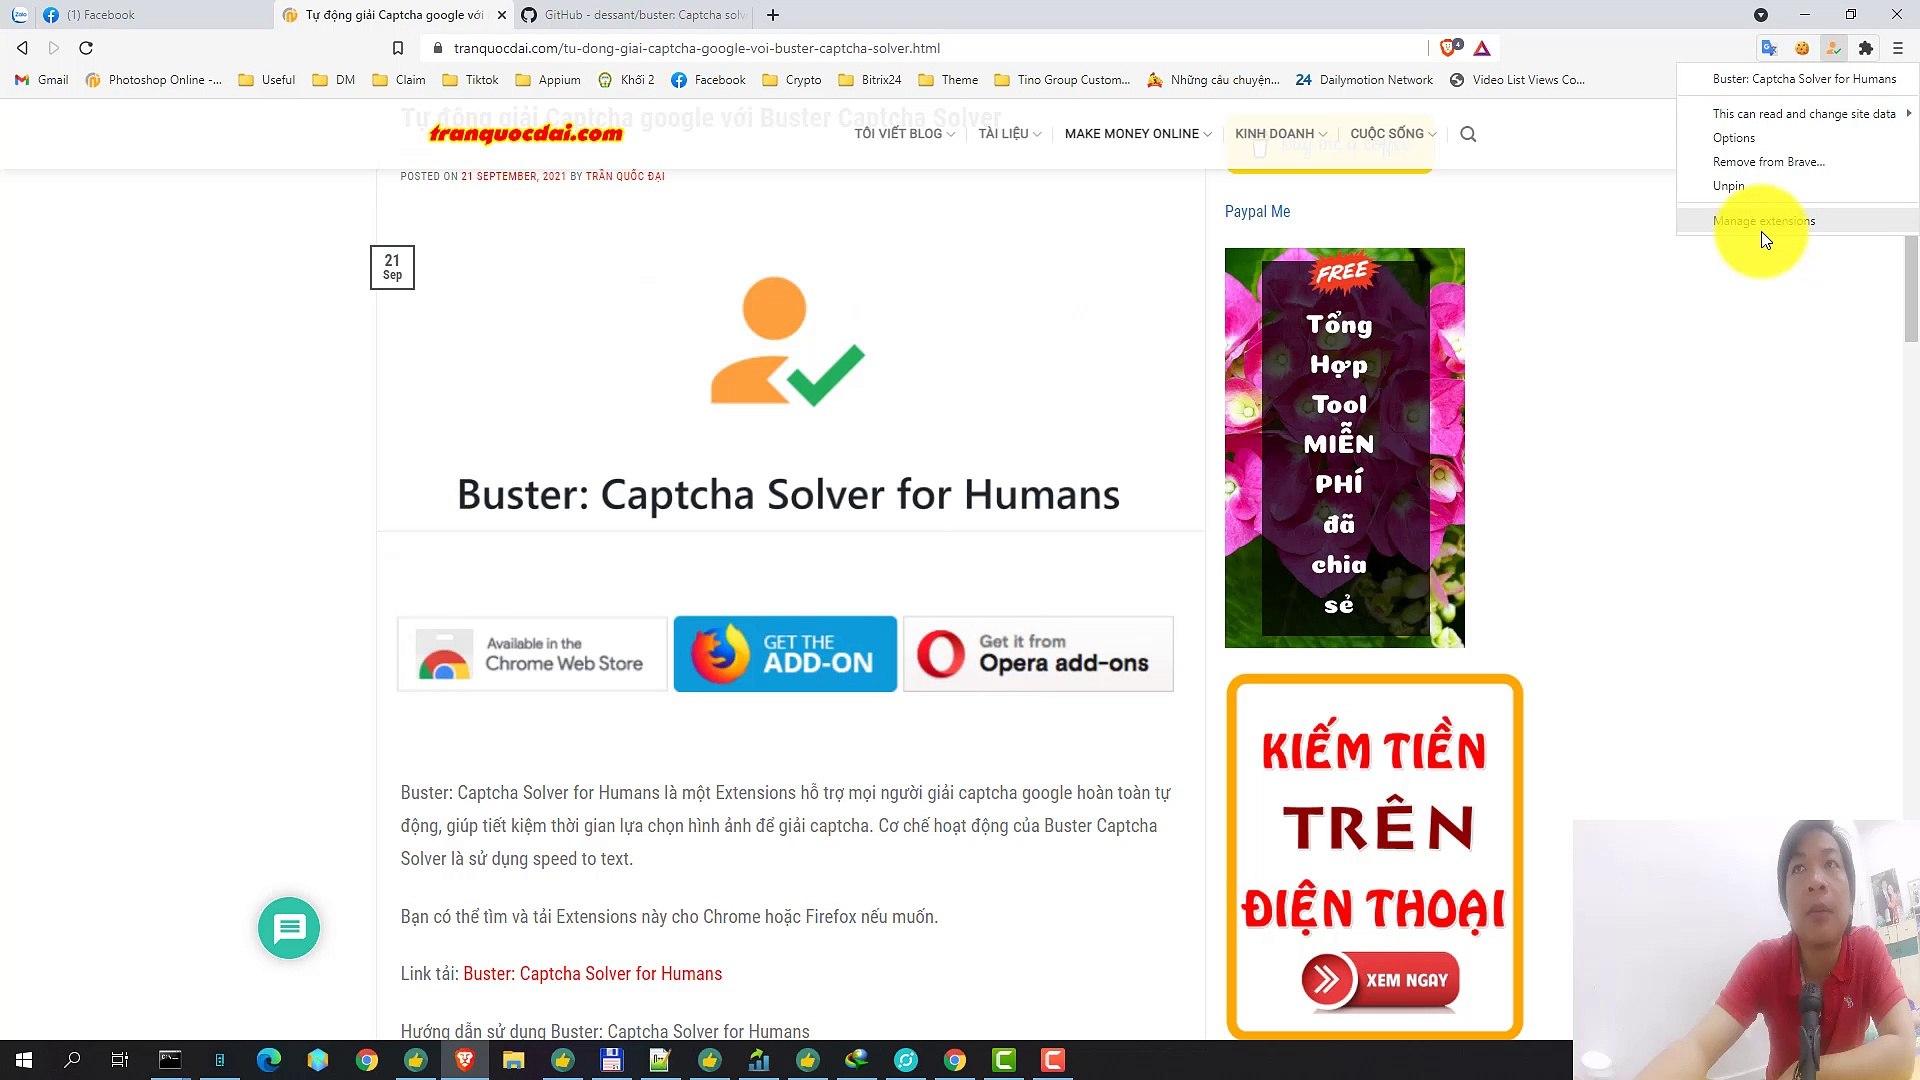 buster captcha solver for humans on iphone｜TikTok Search